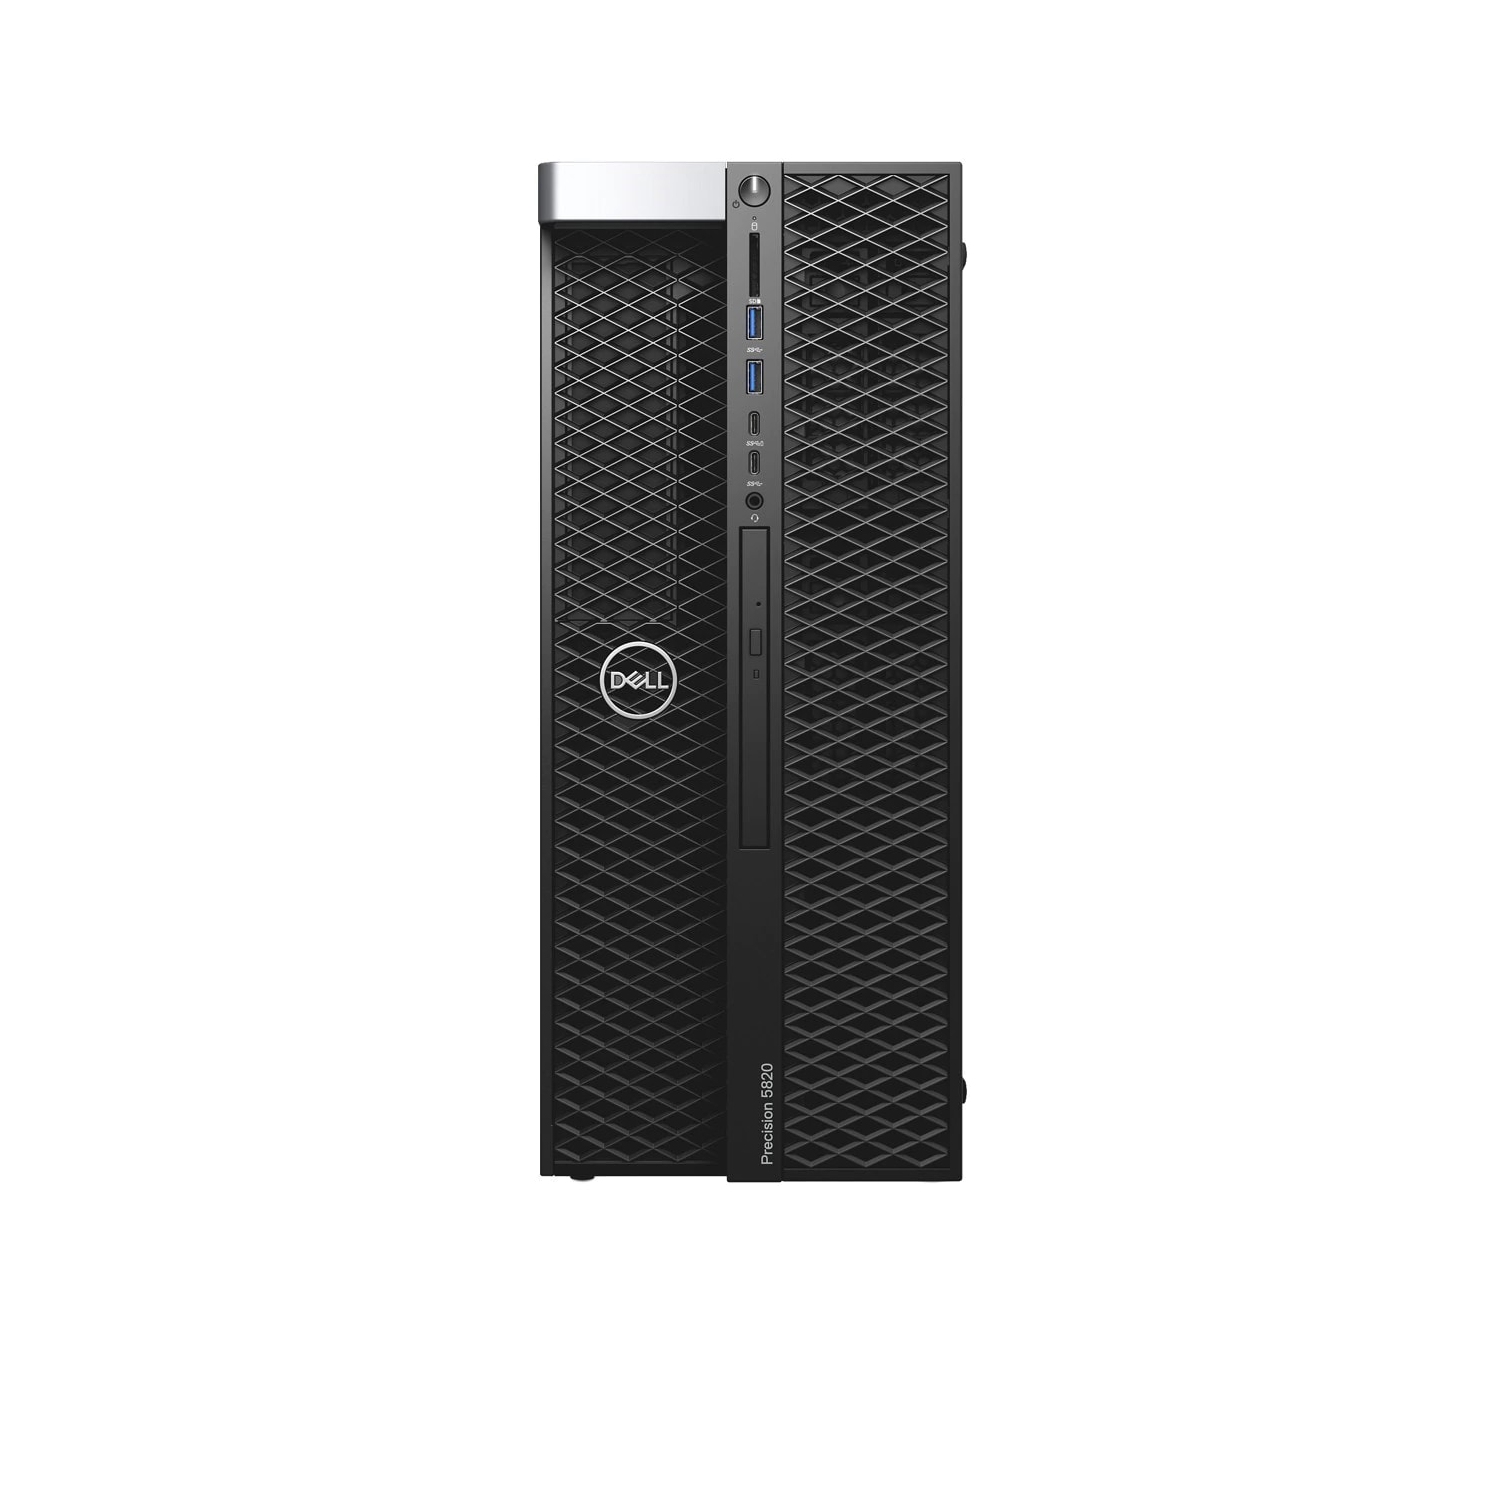 Refurbished (Excellent) - Dell Precision T5820 Workstation Desktop (2018) | Core Xeon W - 512GB SSD - 32GB RAM - Quadro P2200 | 10 Cores @ 4.5 GHz Certified Refurbished